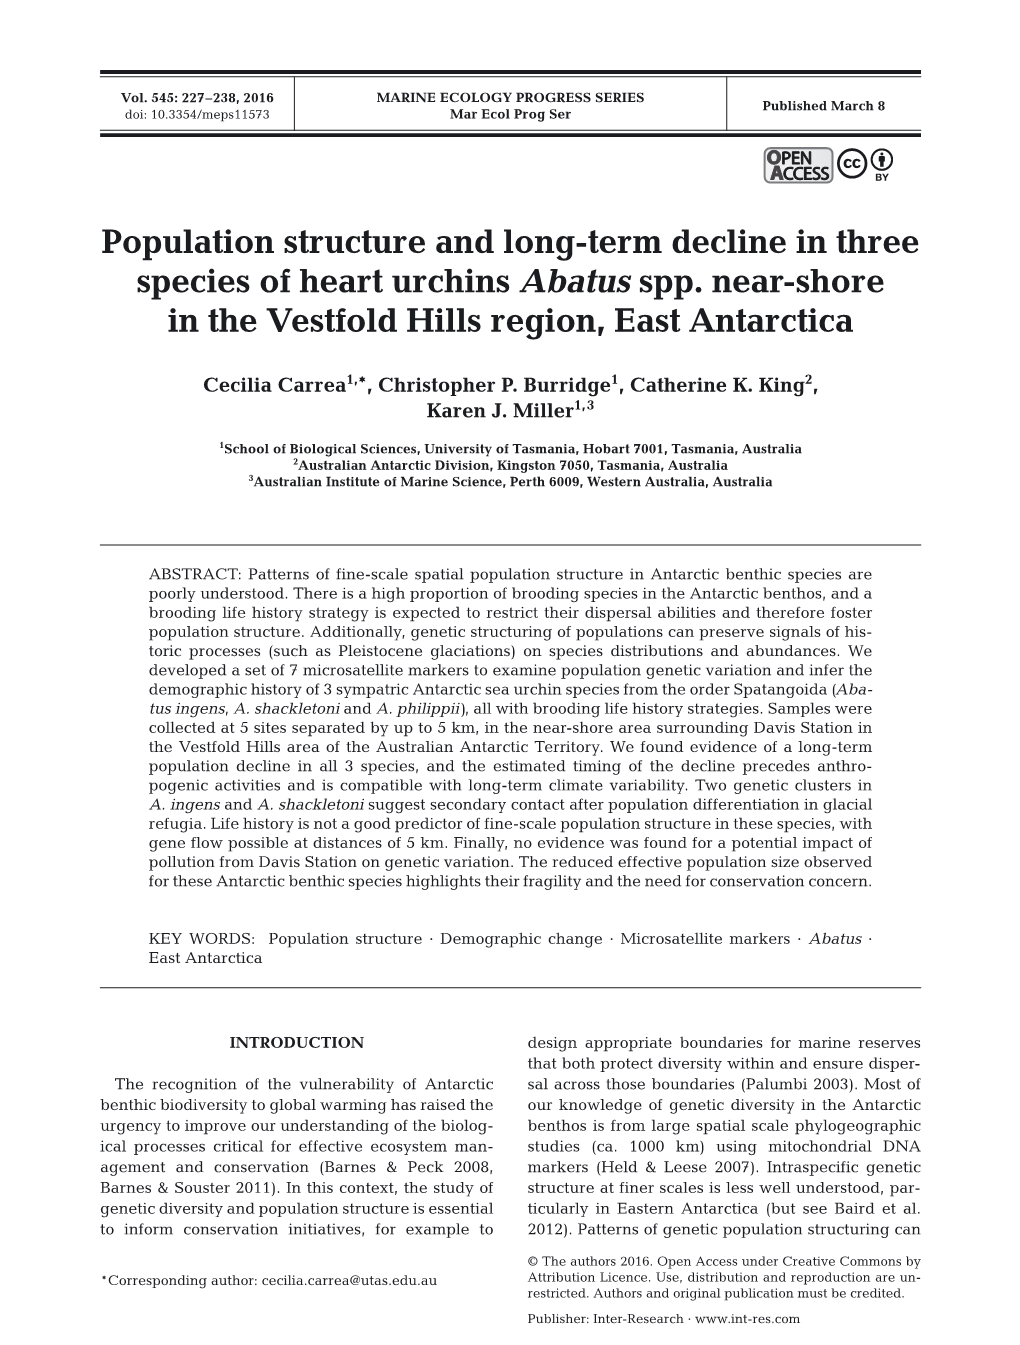 Population Structure and Long-Term Decline in Three Species of Heart Urchins Abatus Spp